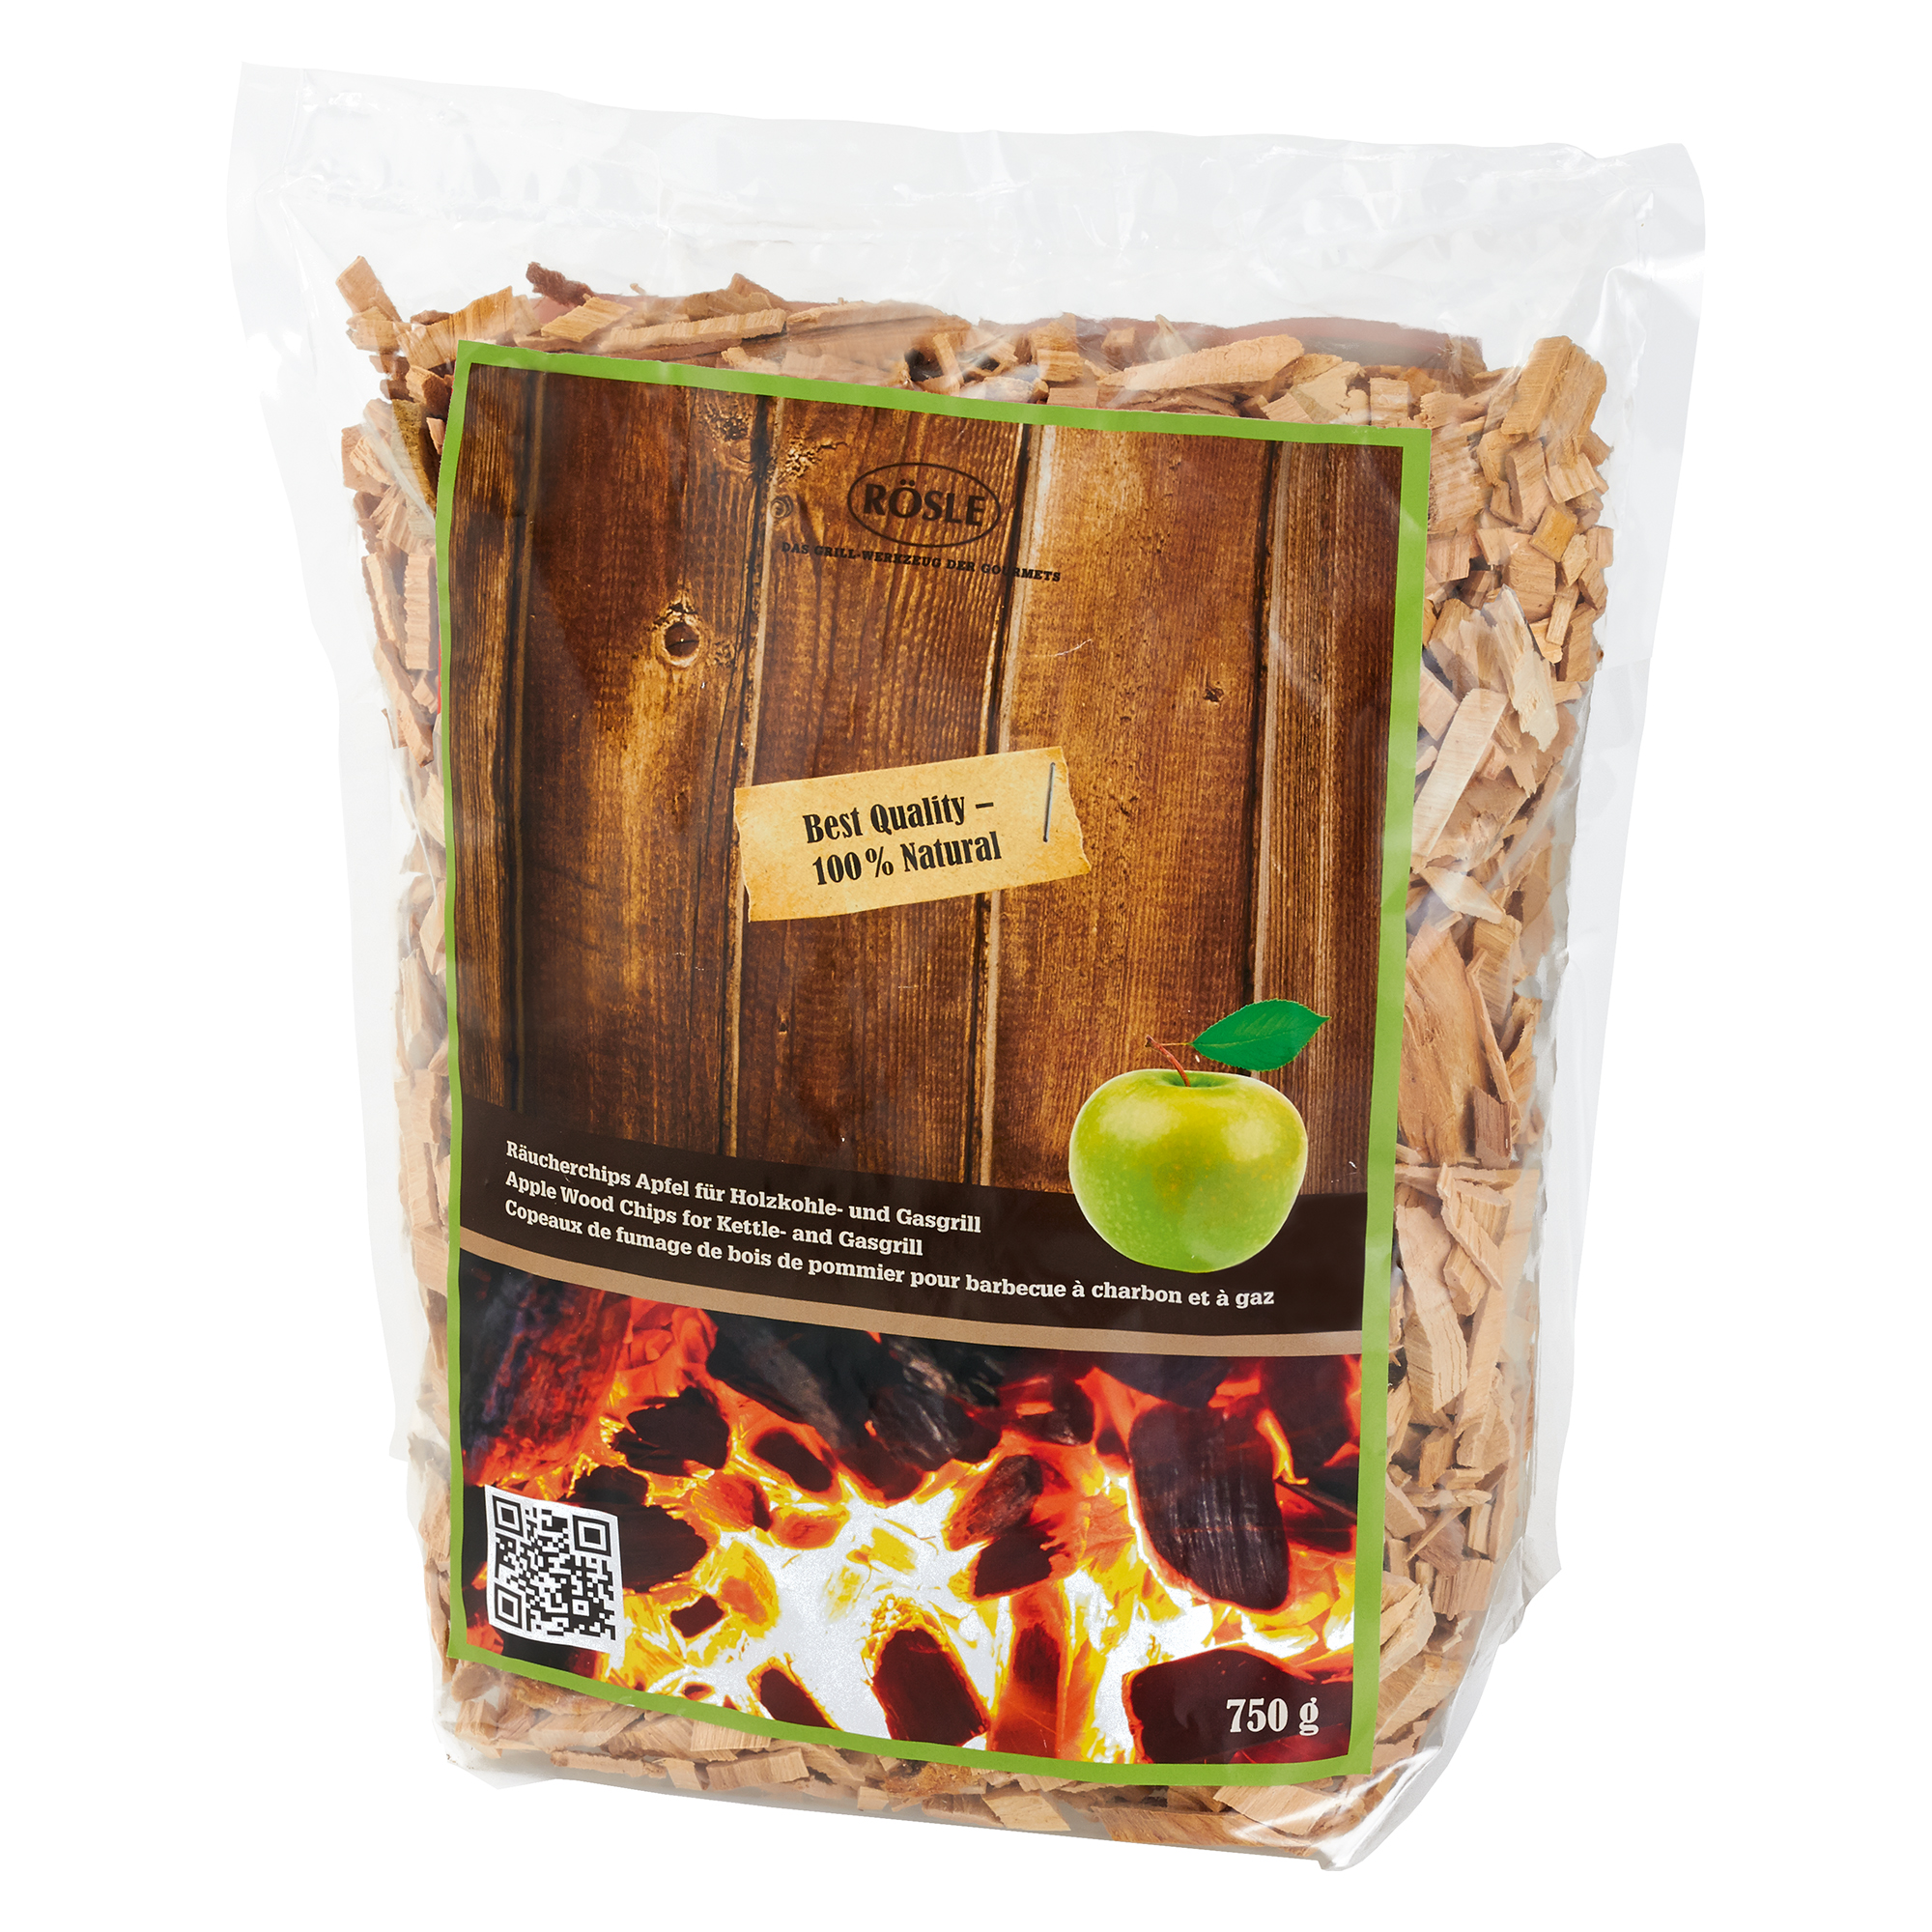 Apple Wood Chips 750 g|1.65 lbs